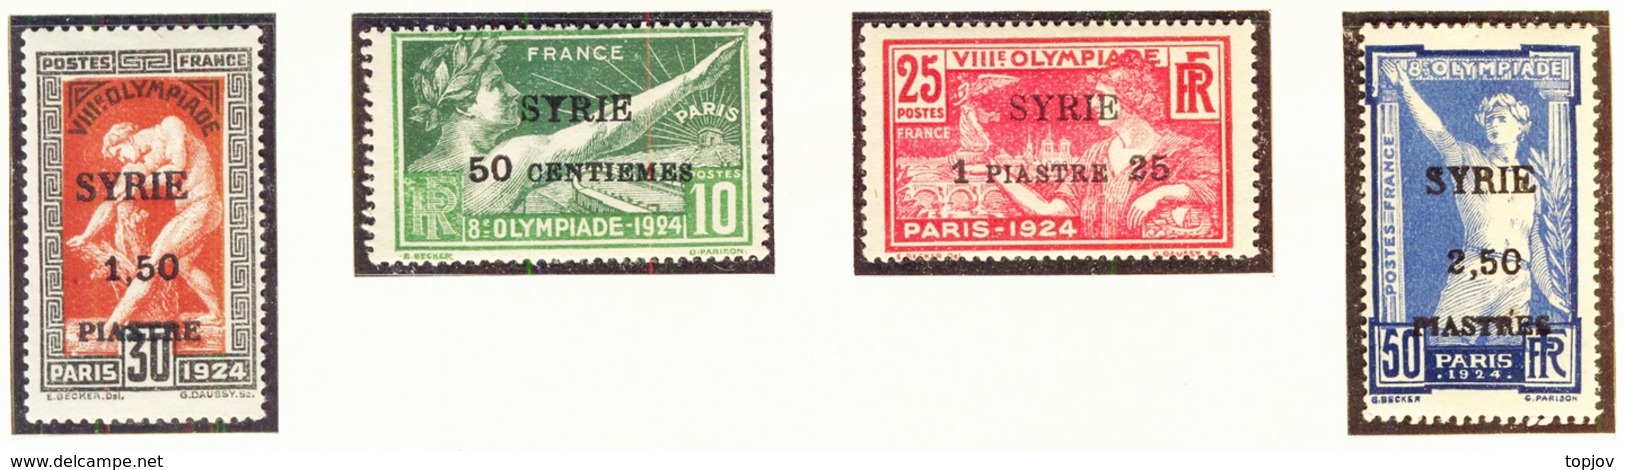 SYRIA - SYRIE -  OLYMPICS GAMES Ovp.  -MLH/MNH - 1924 - Ete 1924: Paris